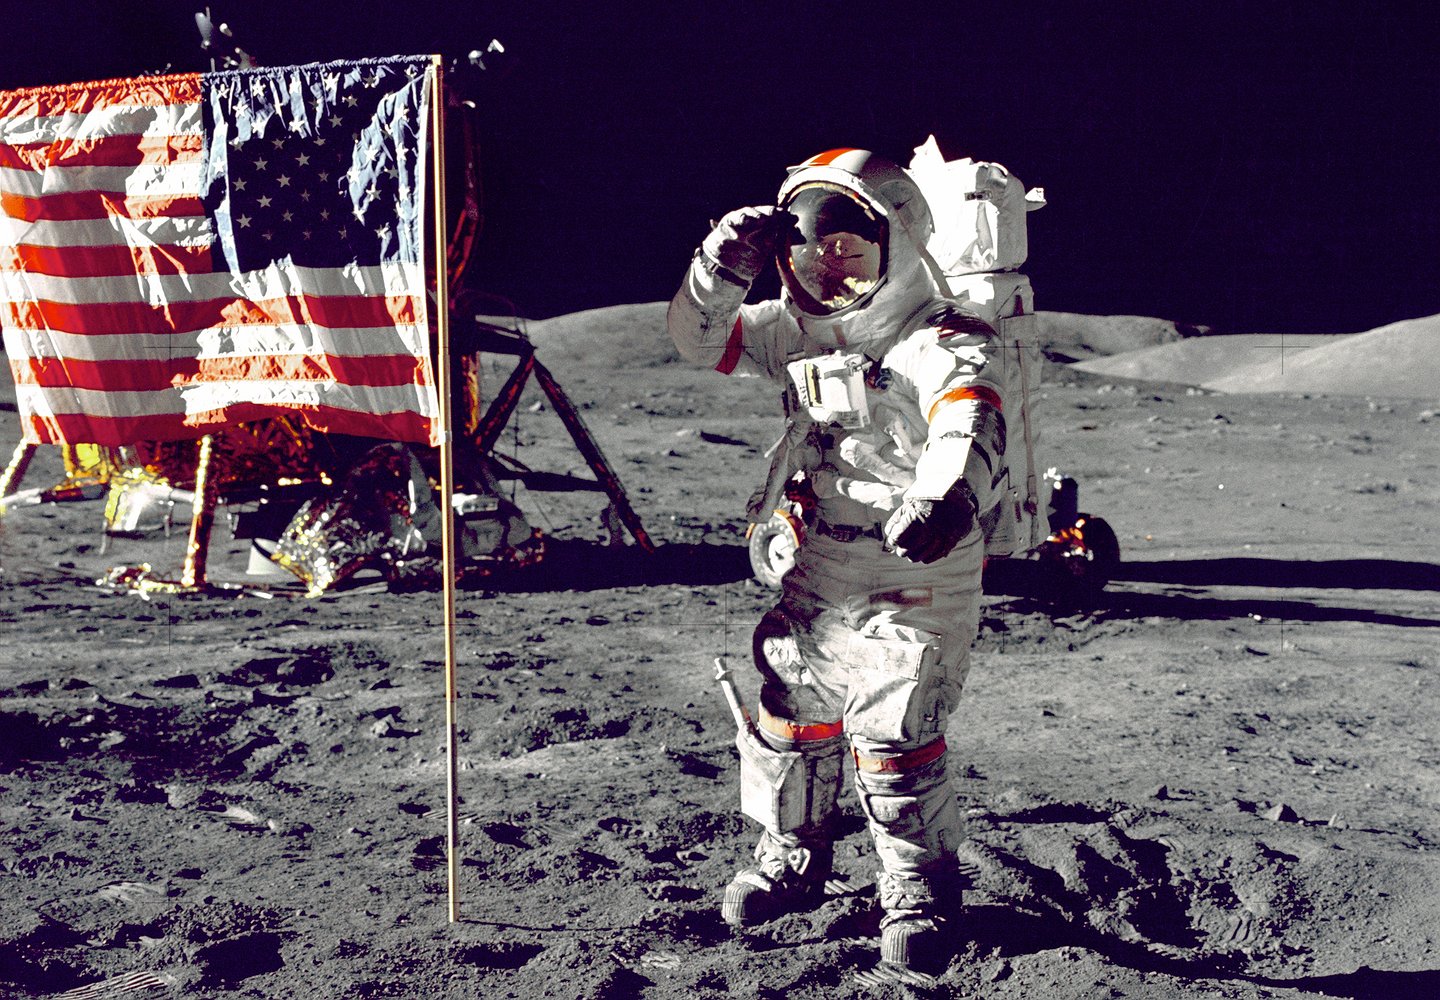 Can You Answer All 20 of These Super Easy Trivia Questions Correctly? neil armstrong on moon